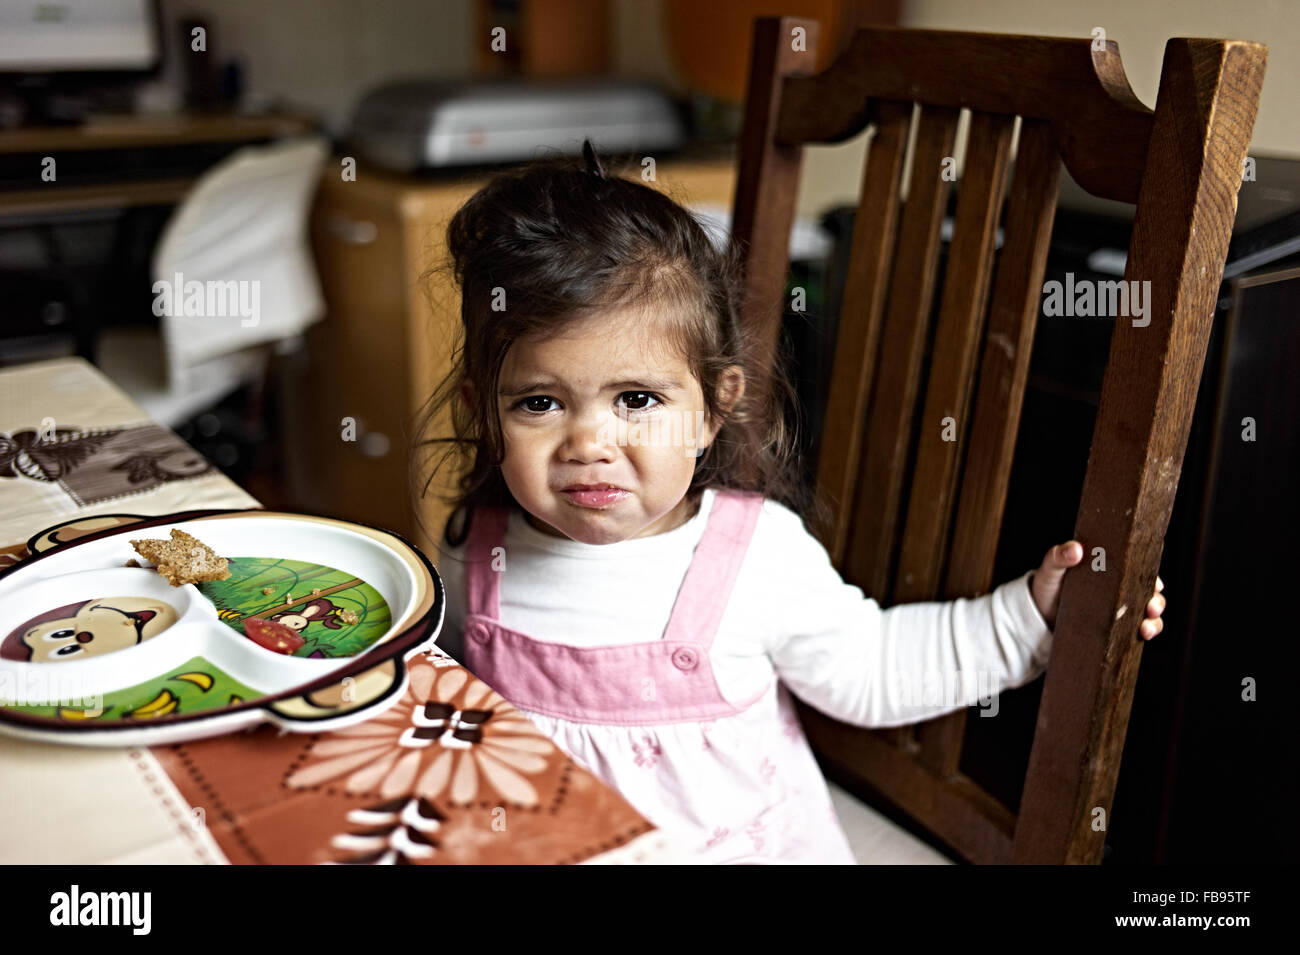 young mixed raced girl sits at table and eats her lunch Stock Photo